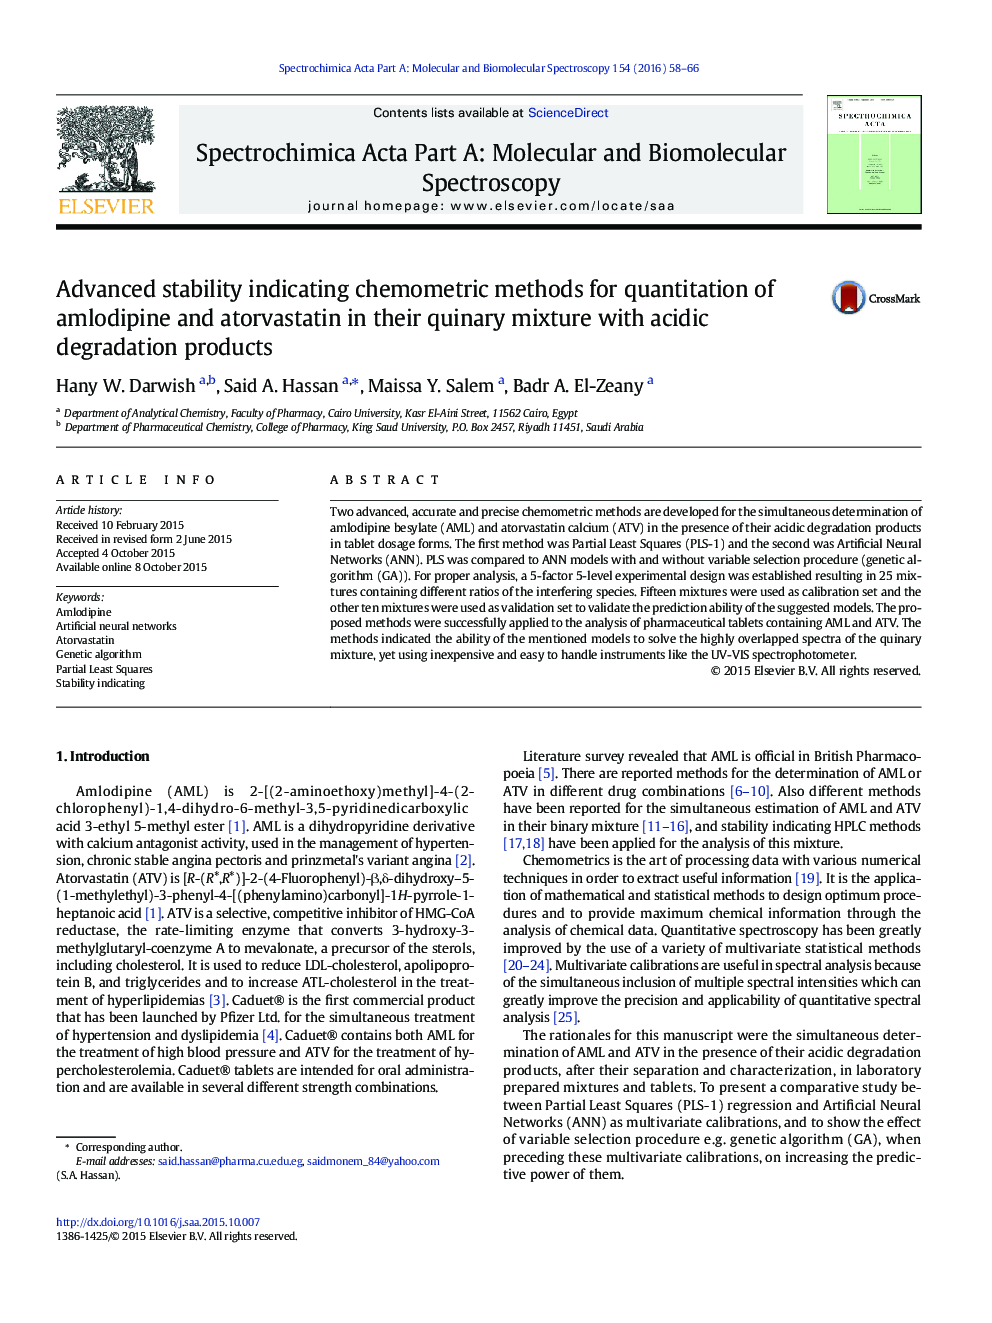 Advanced stability indicating chemometric methods for quantitation of amlodipine and atorvastatin in their quinary mixture with acidic degradation products